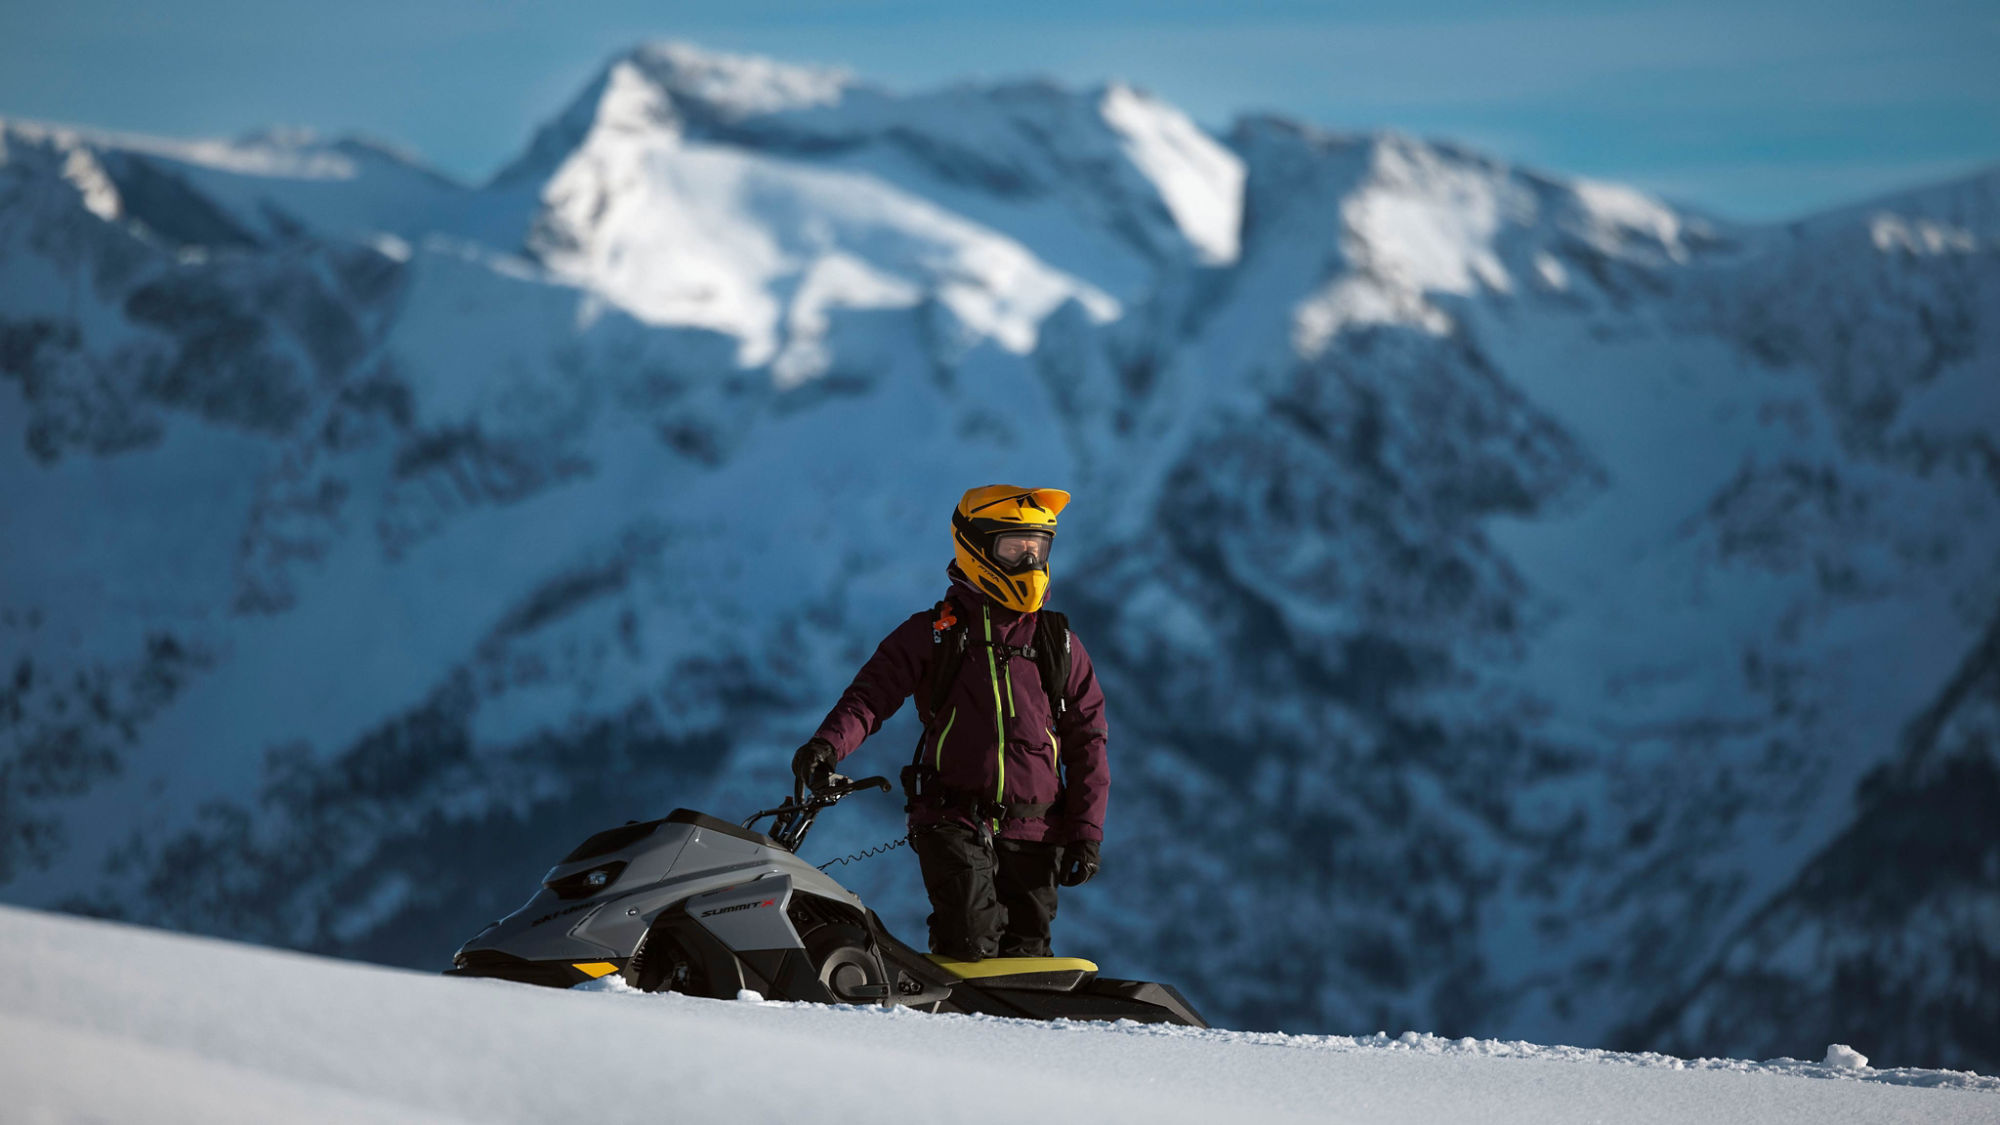 What’s the best deep snow riding gear?